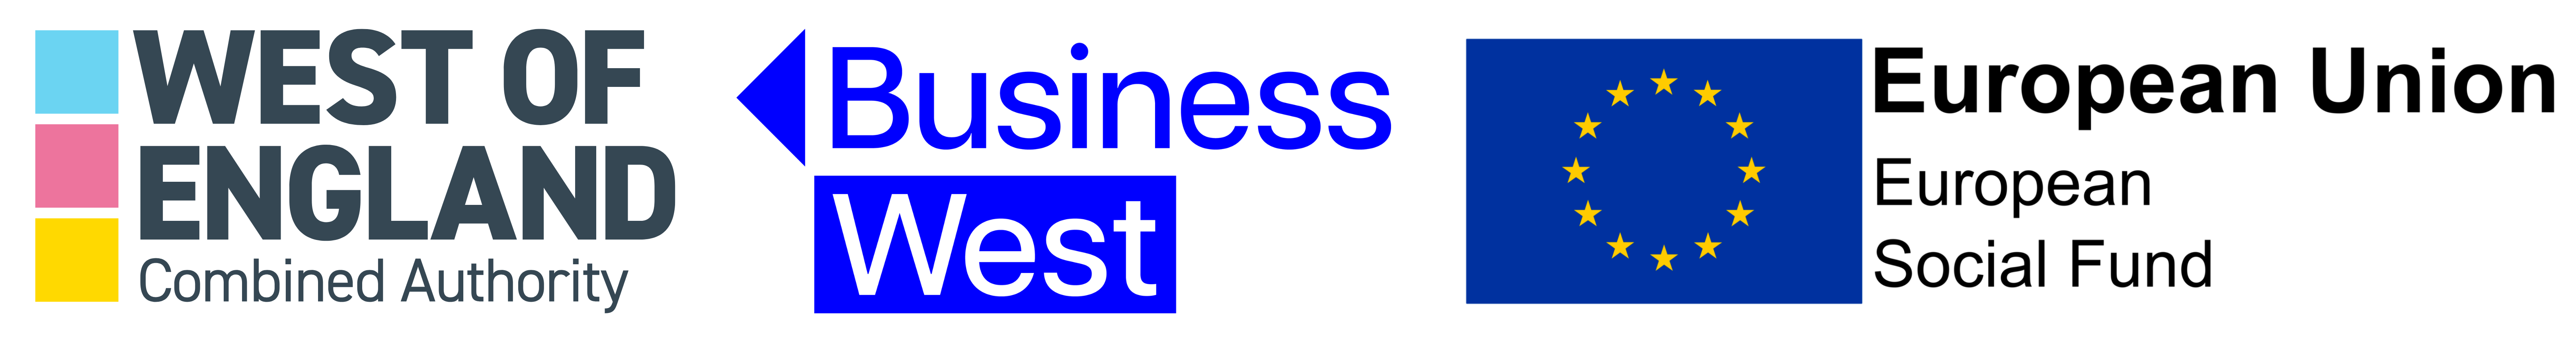 Logos of West of England, Business West, and European Union